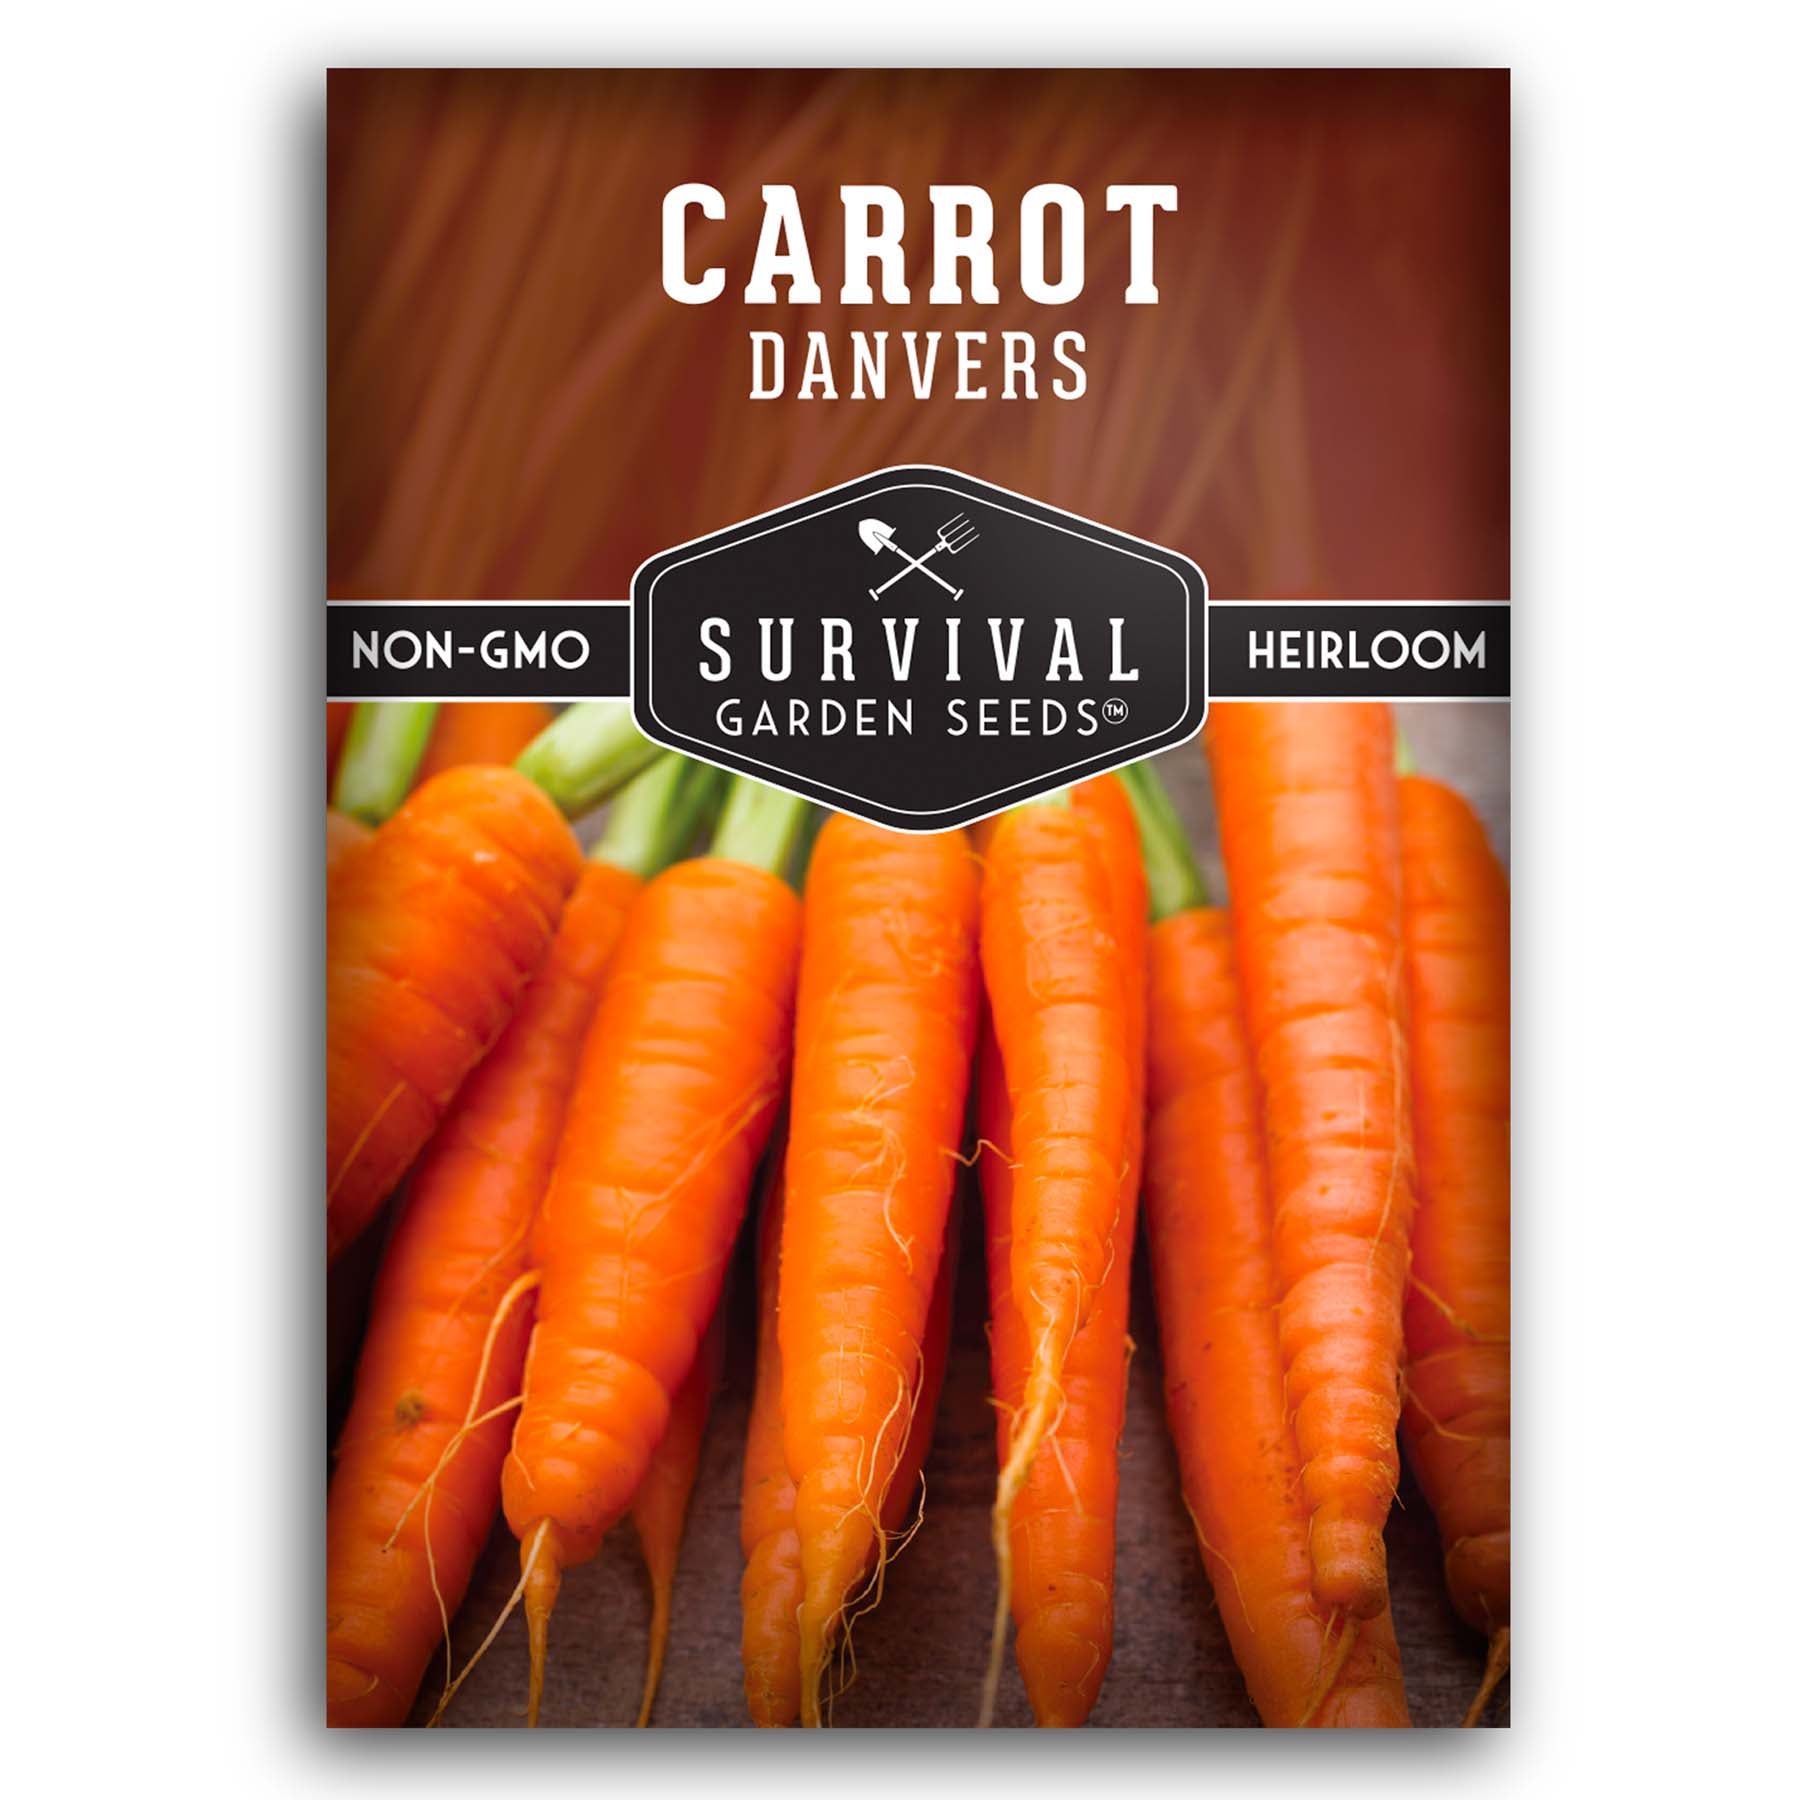 Danvers Carrot Seeds for planting